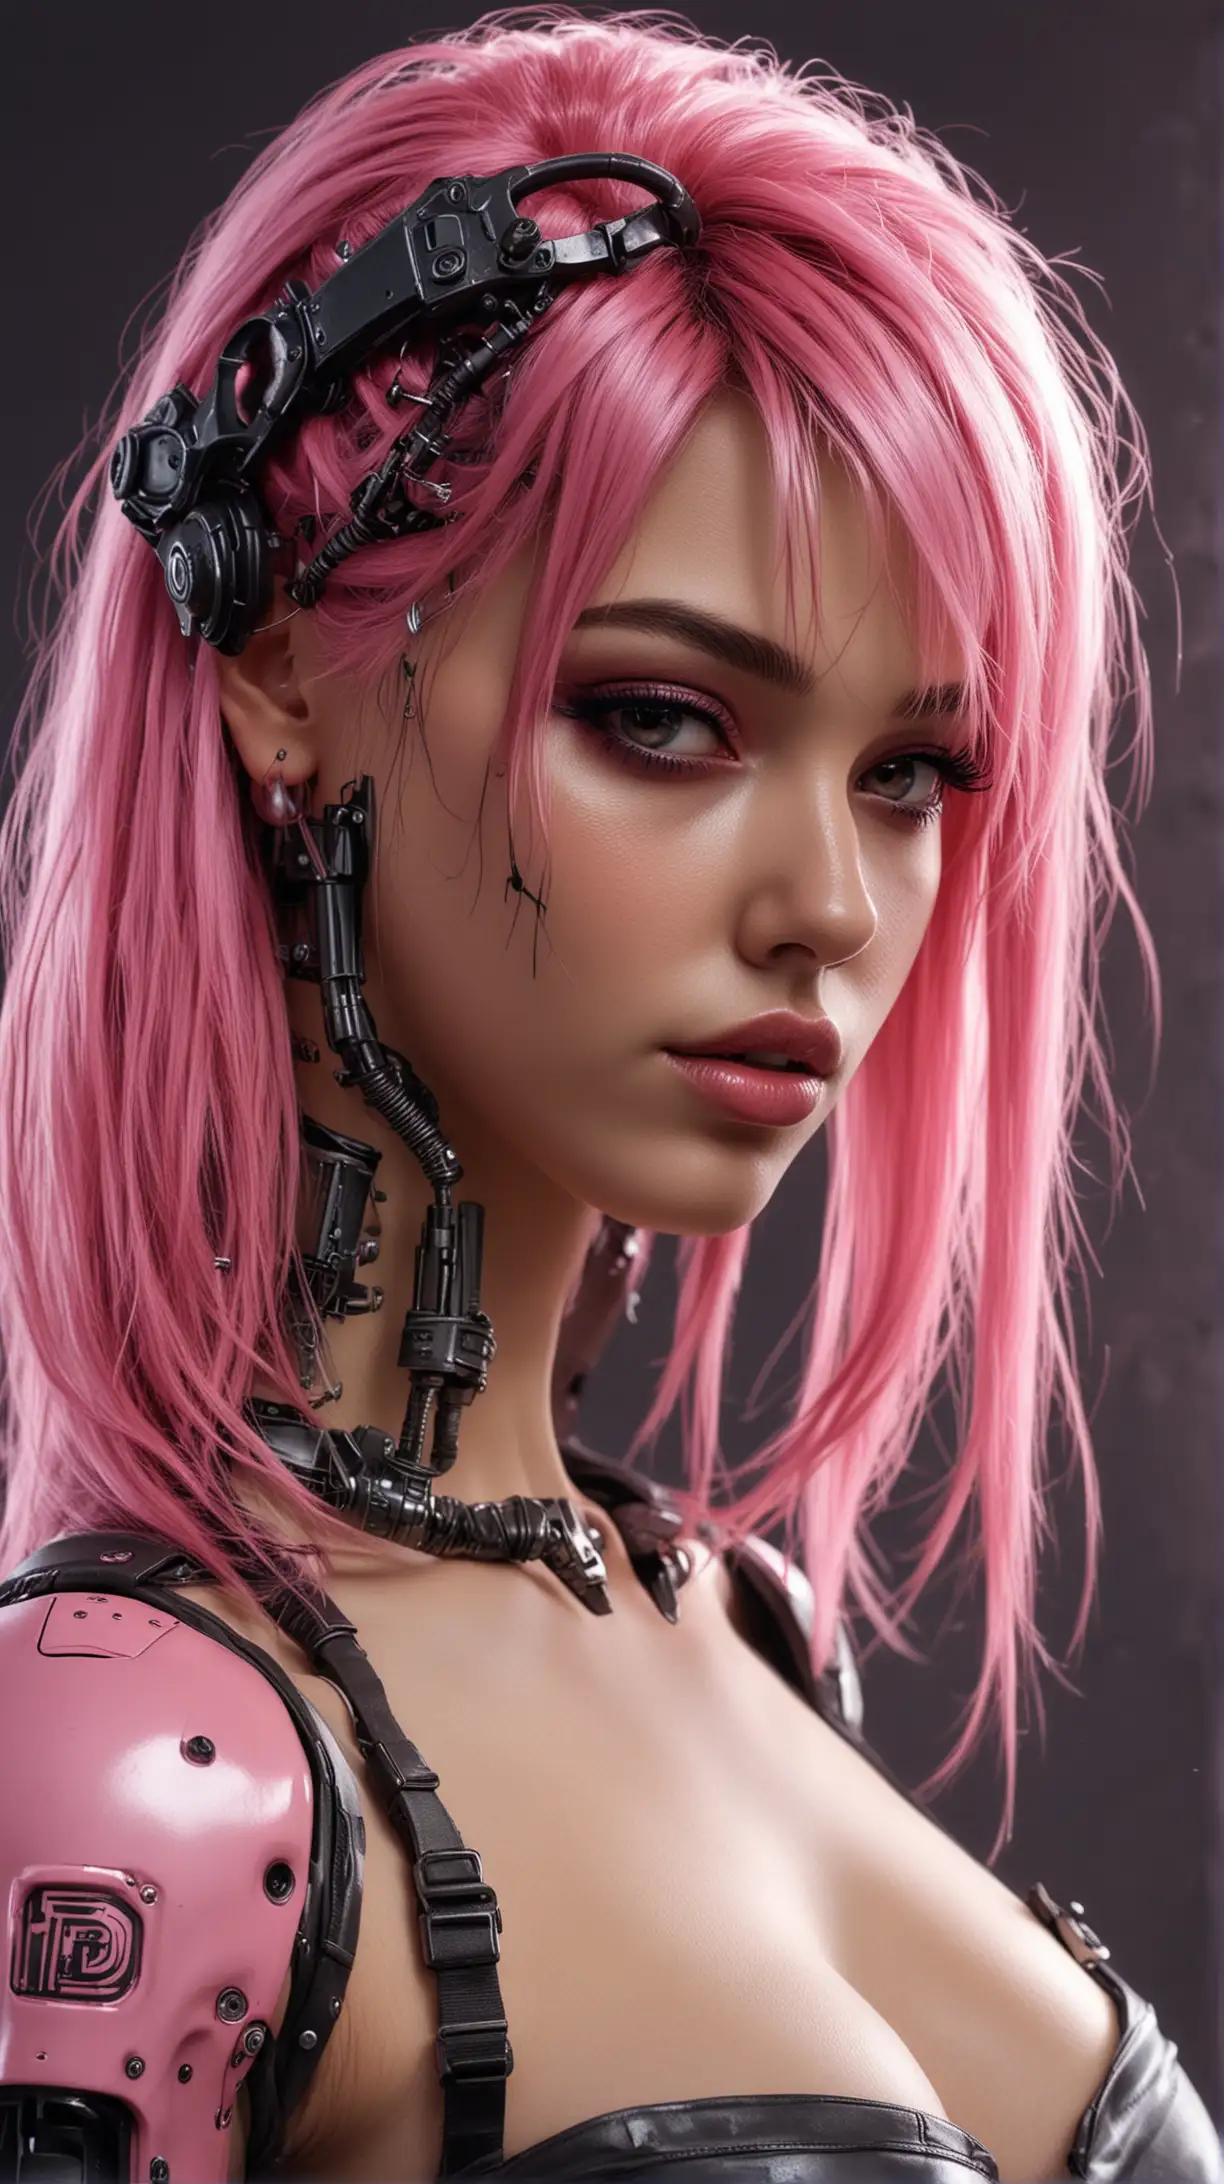 Cyberpunk Curvy Girl with Pink Hair in High Definition